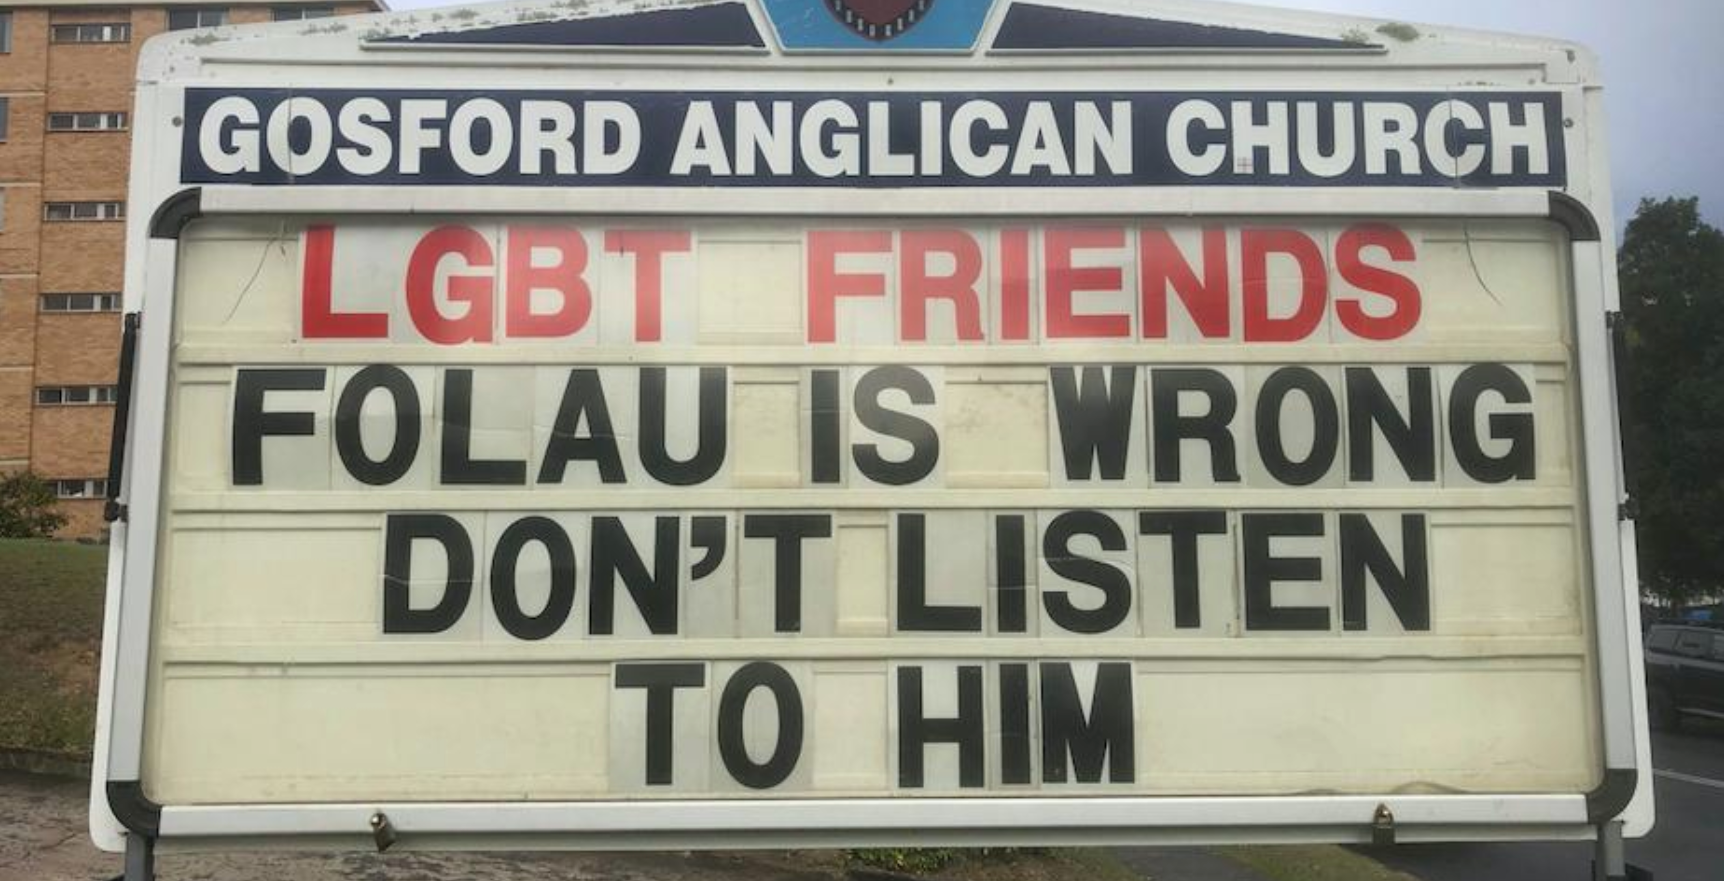 ‘Folau is wrong’: NSW church stands in solidarity with LGBTIQ+ community